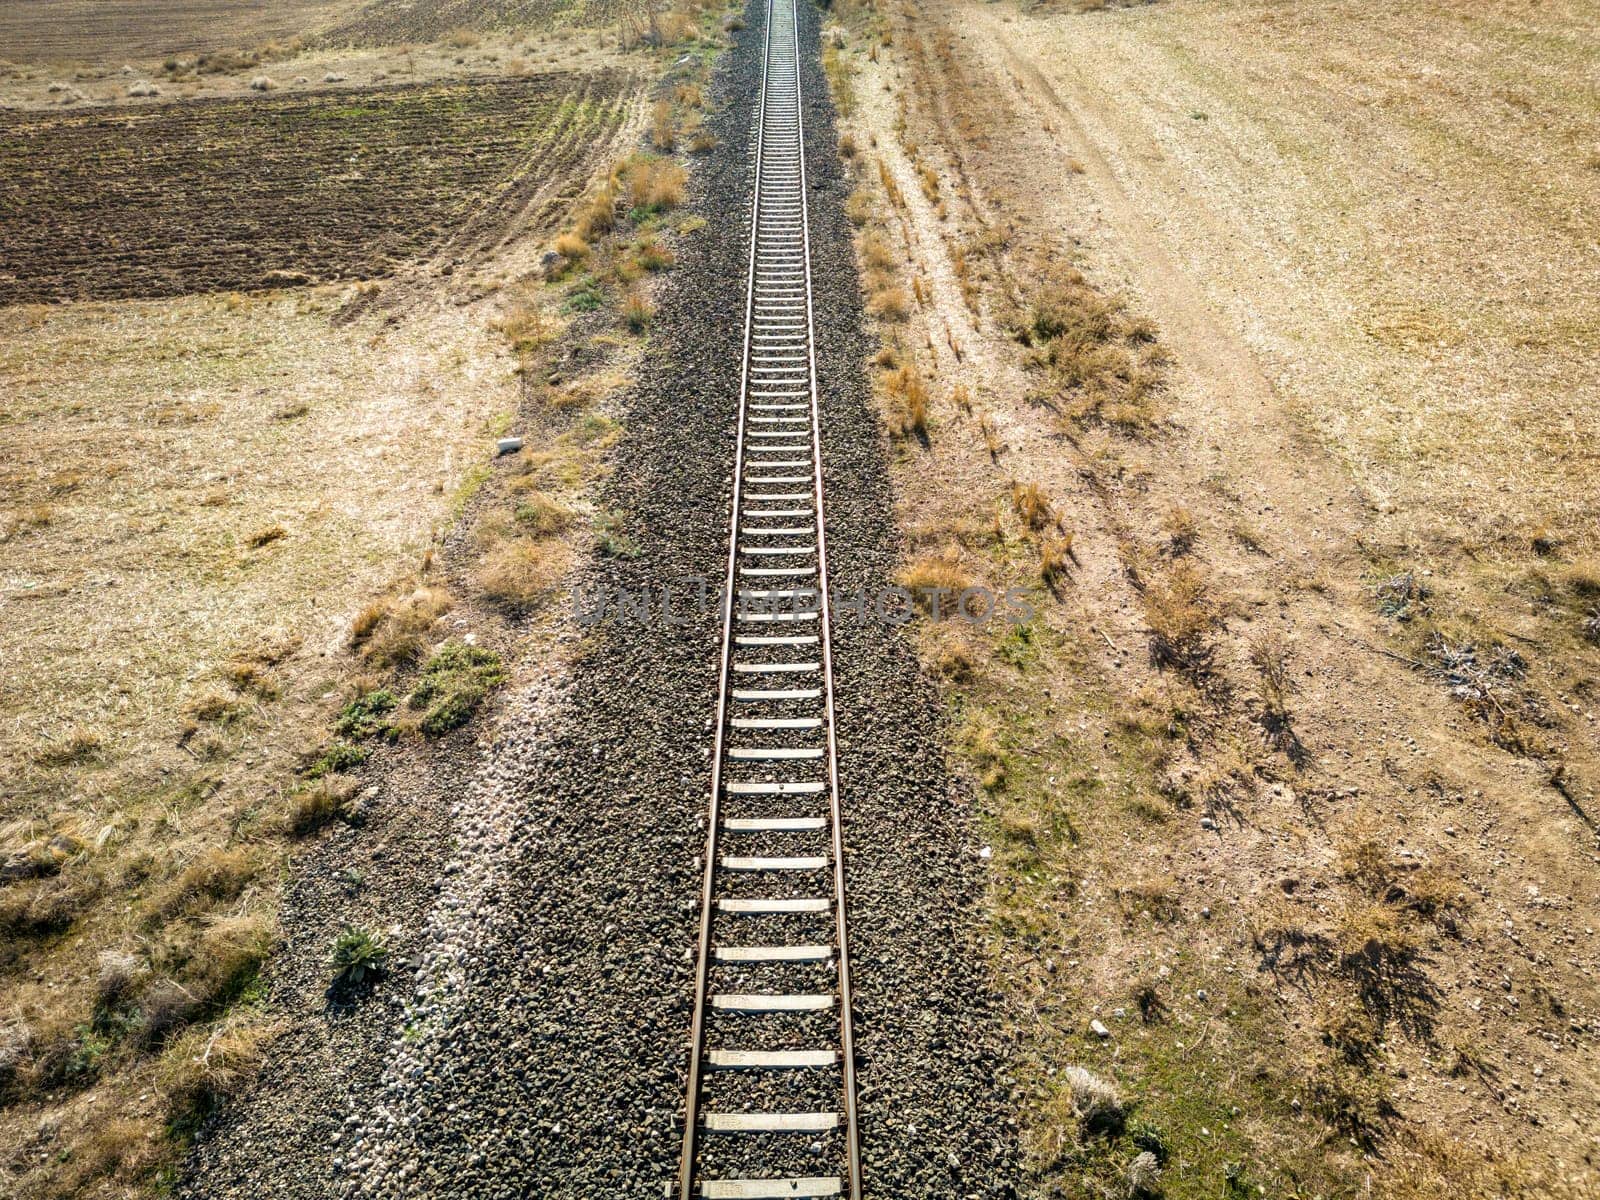 Top view of the train track passing through the arid land, taken with a drone by Sonat